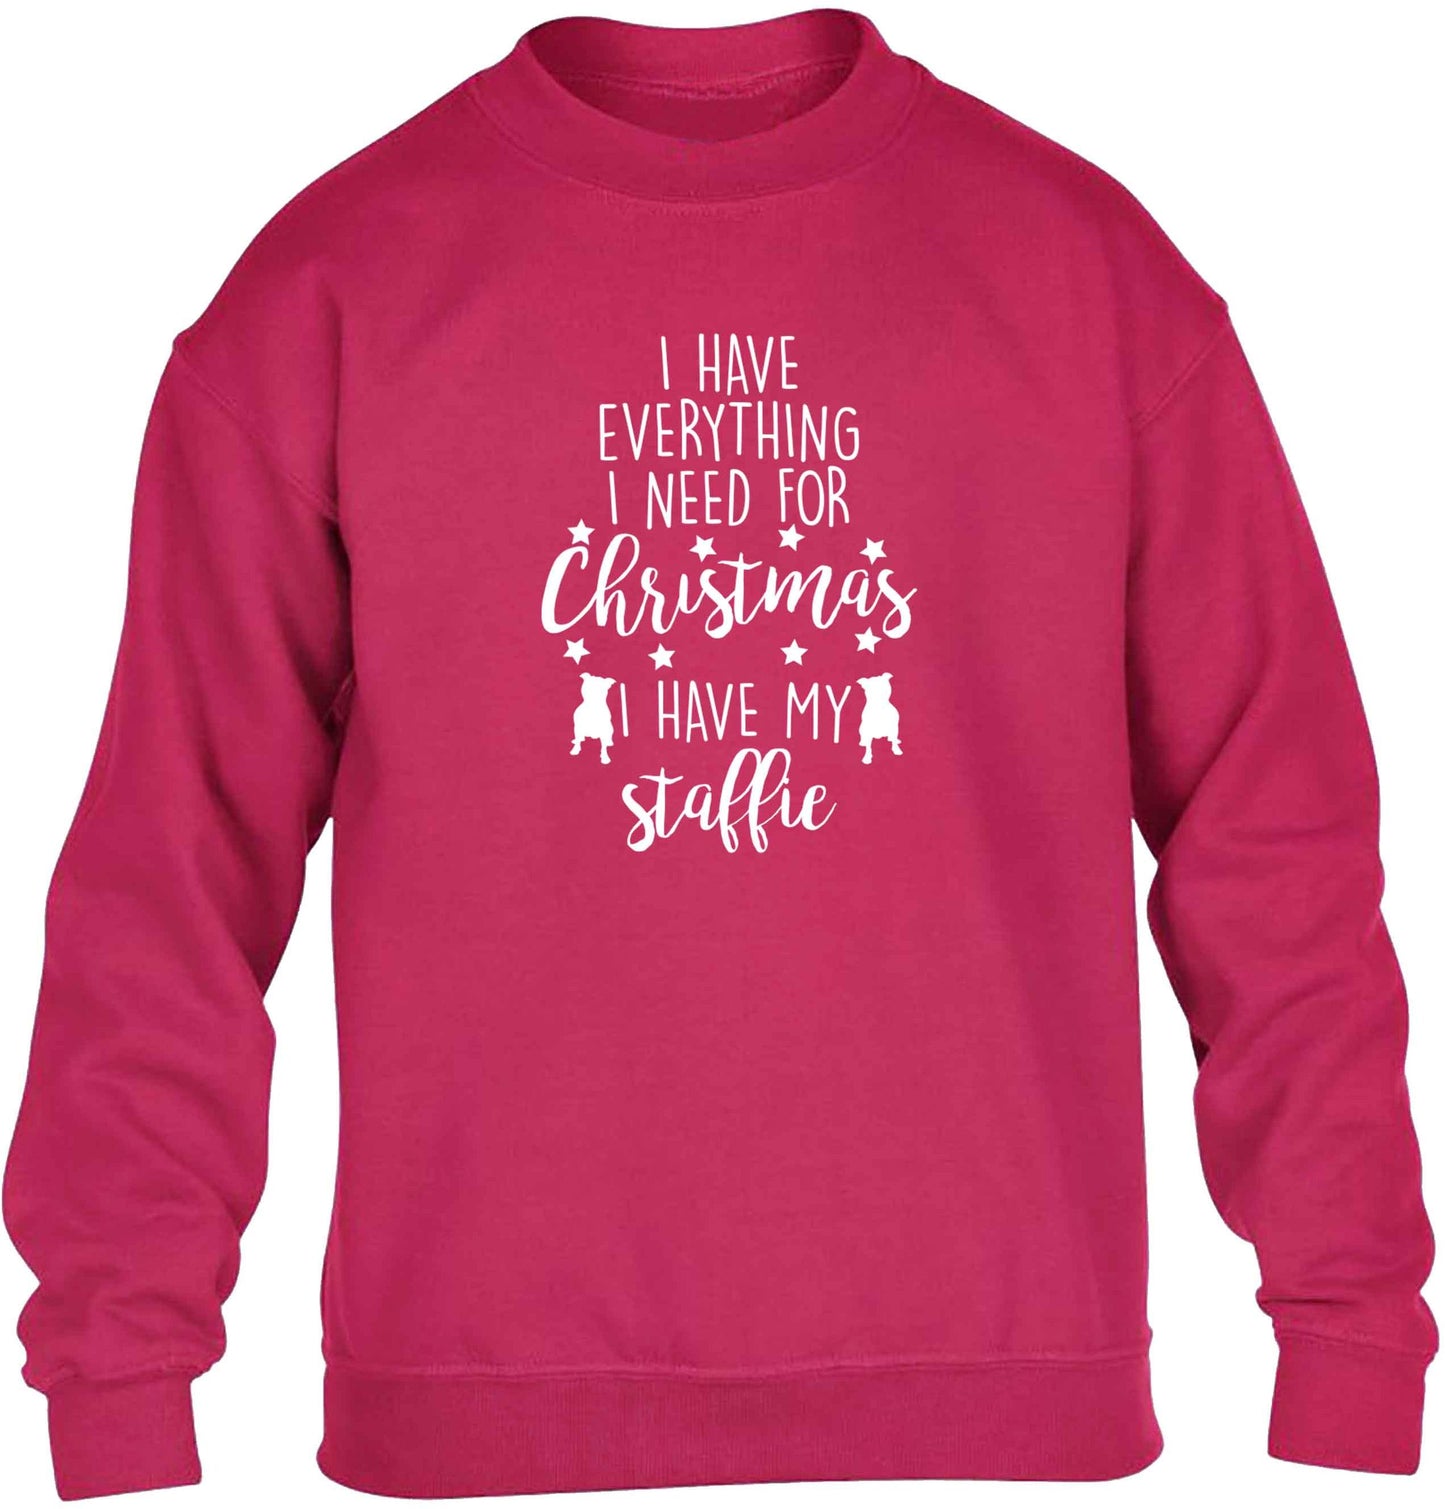 I have everything I need for Christmas I have my staffie children's pink sweater 12-13 Years